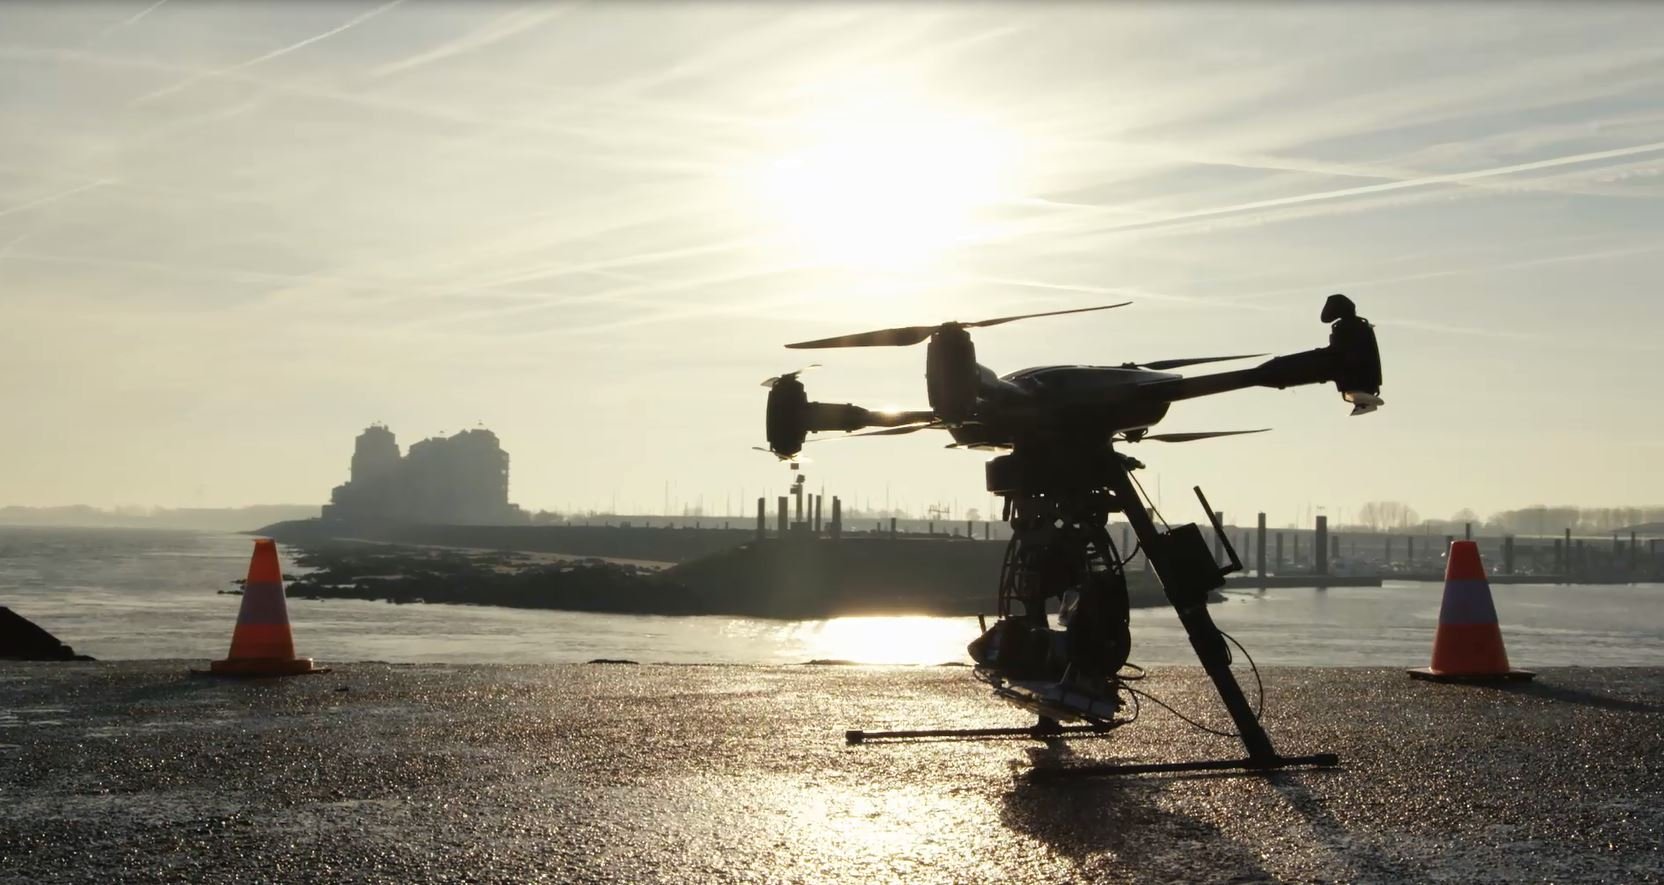 Drones to monitor water quality